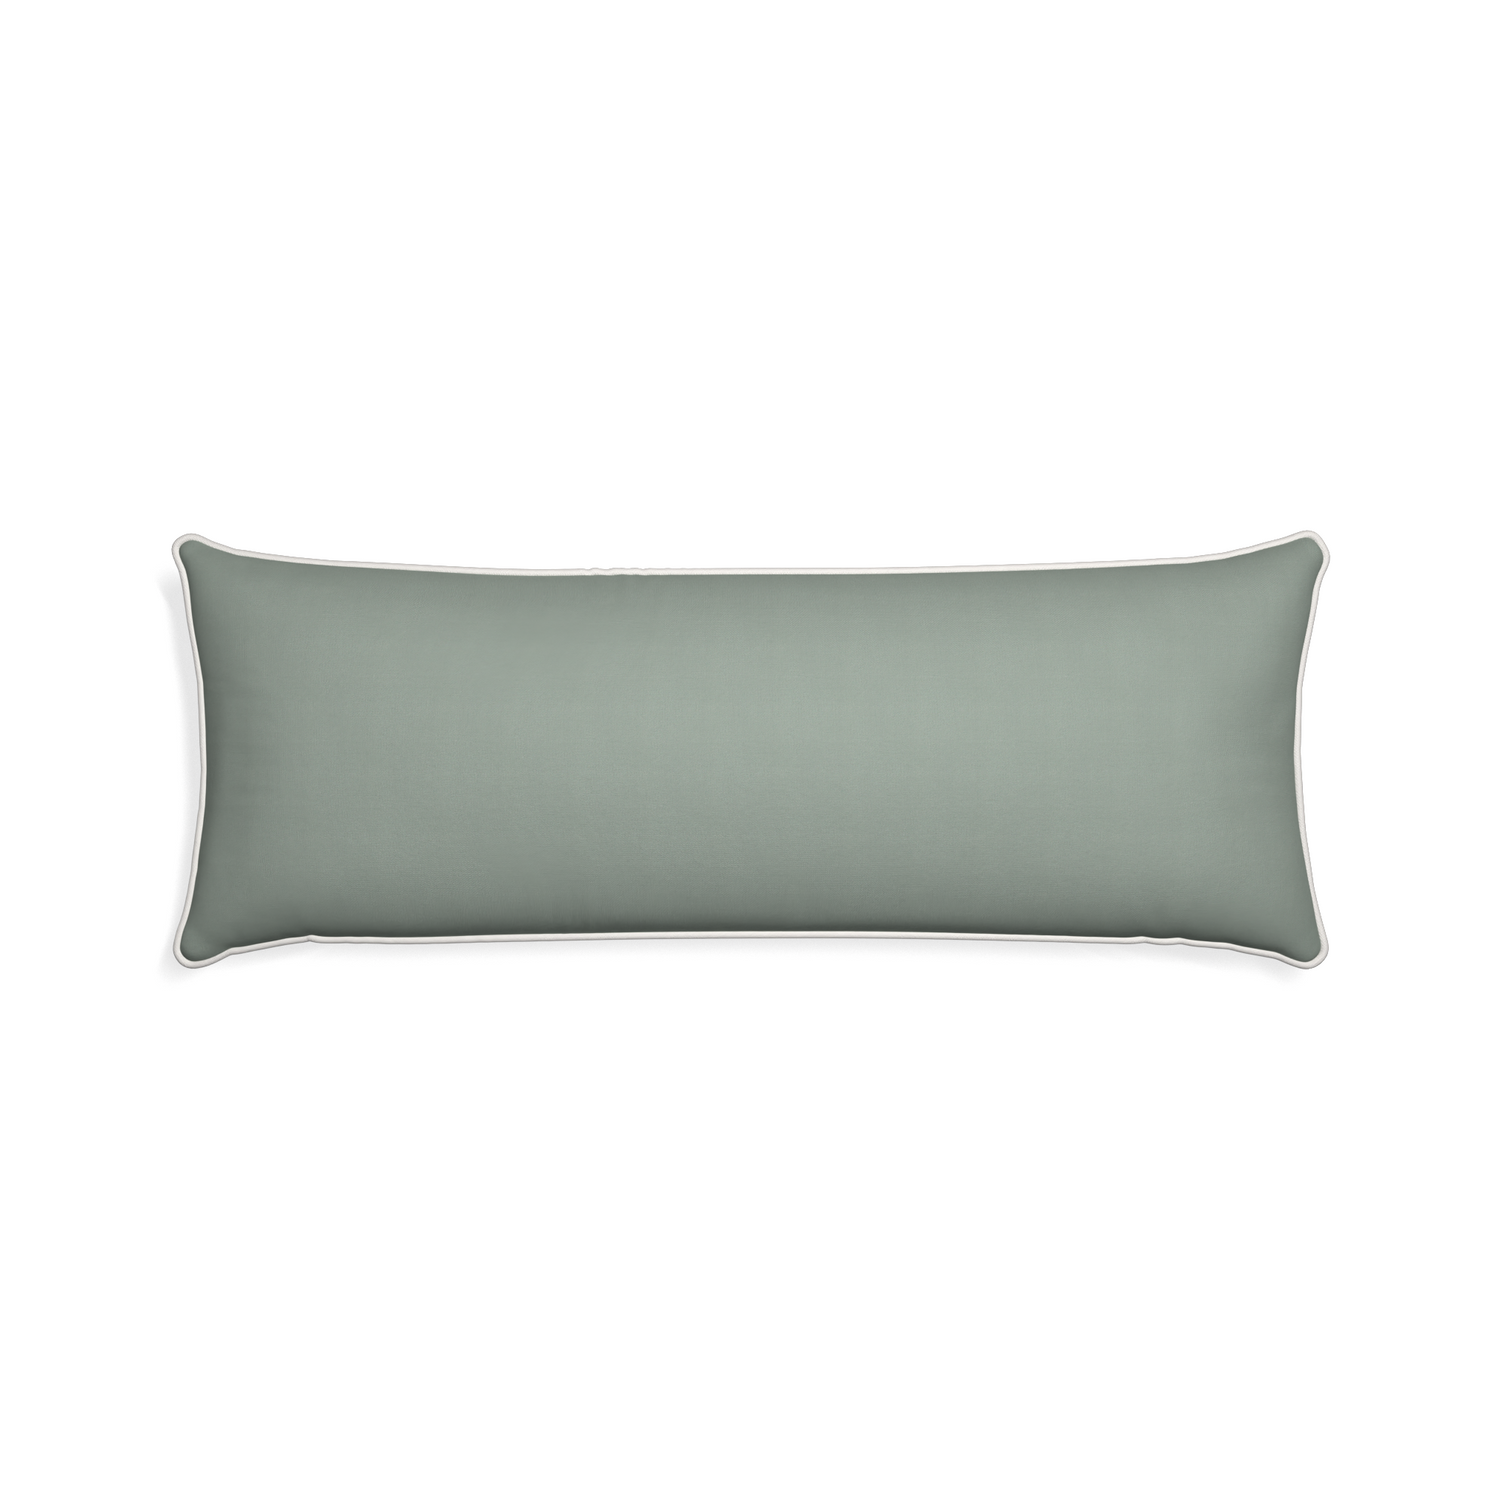 Xl-lumbar sage custom sage green cottonpillow with snow piping on white background